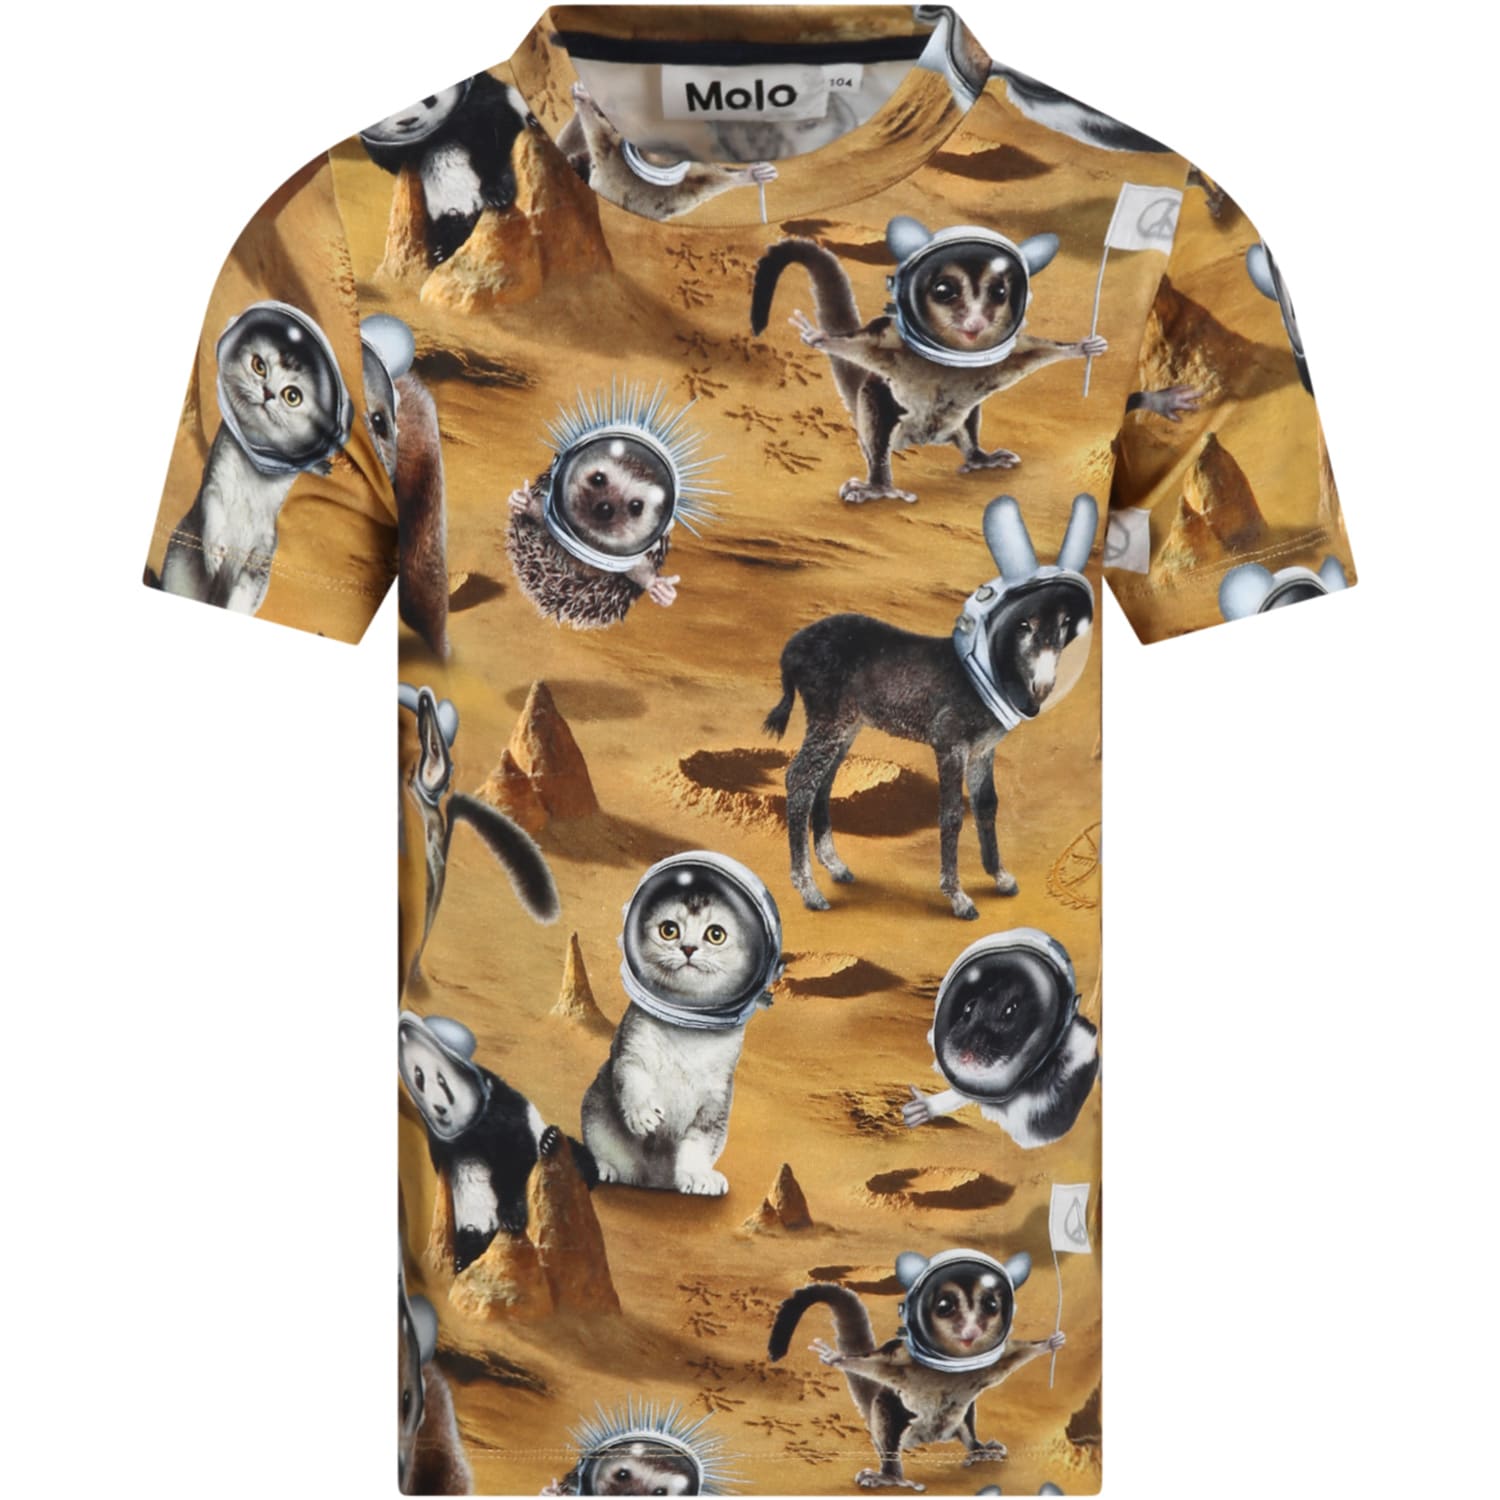 Molo Beige T-shirt For Kids With Astronaut Animals